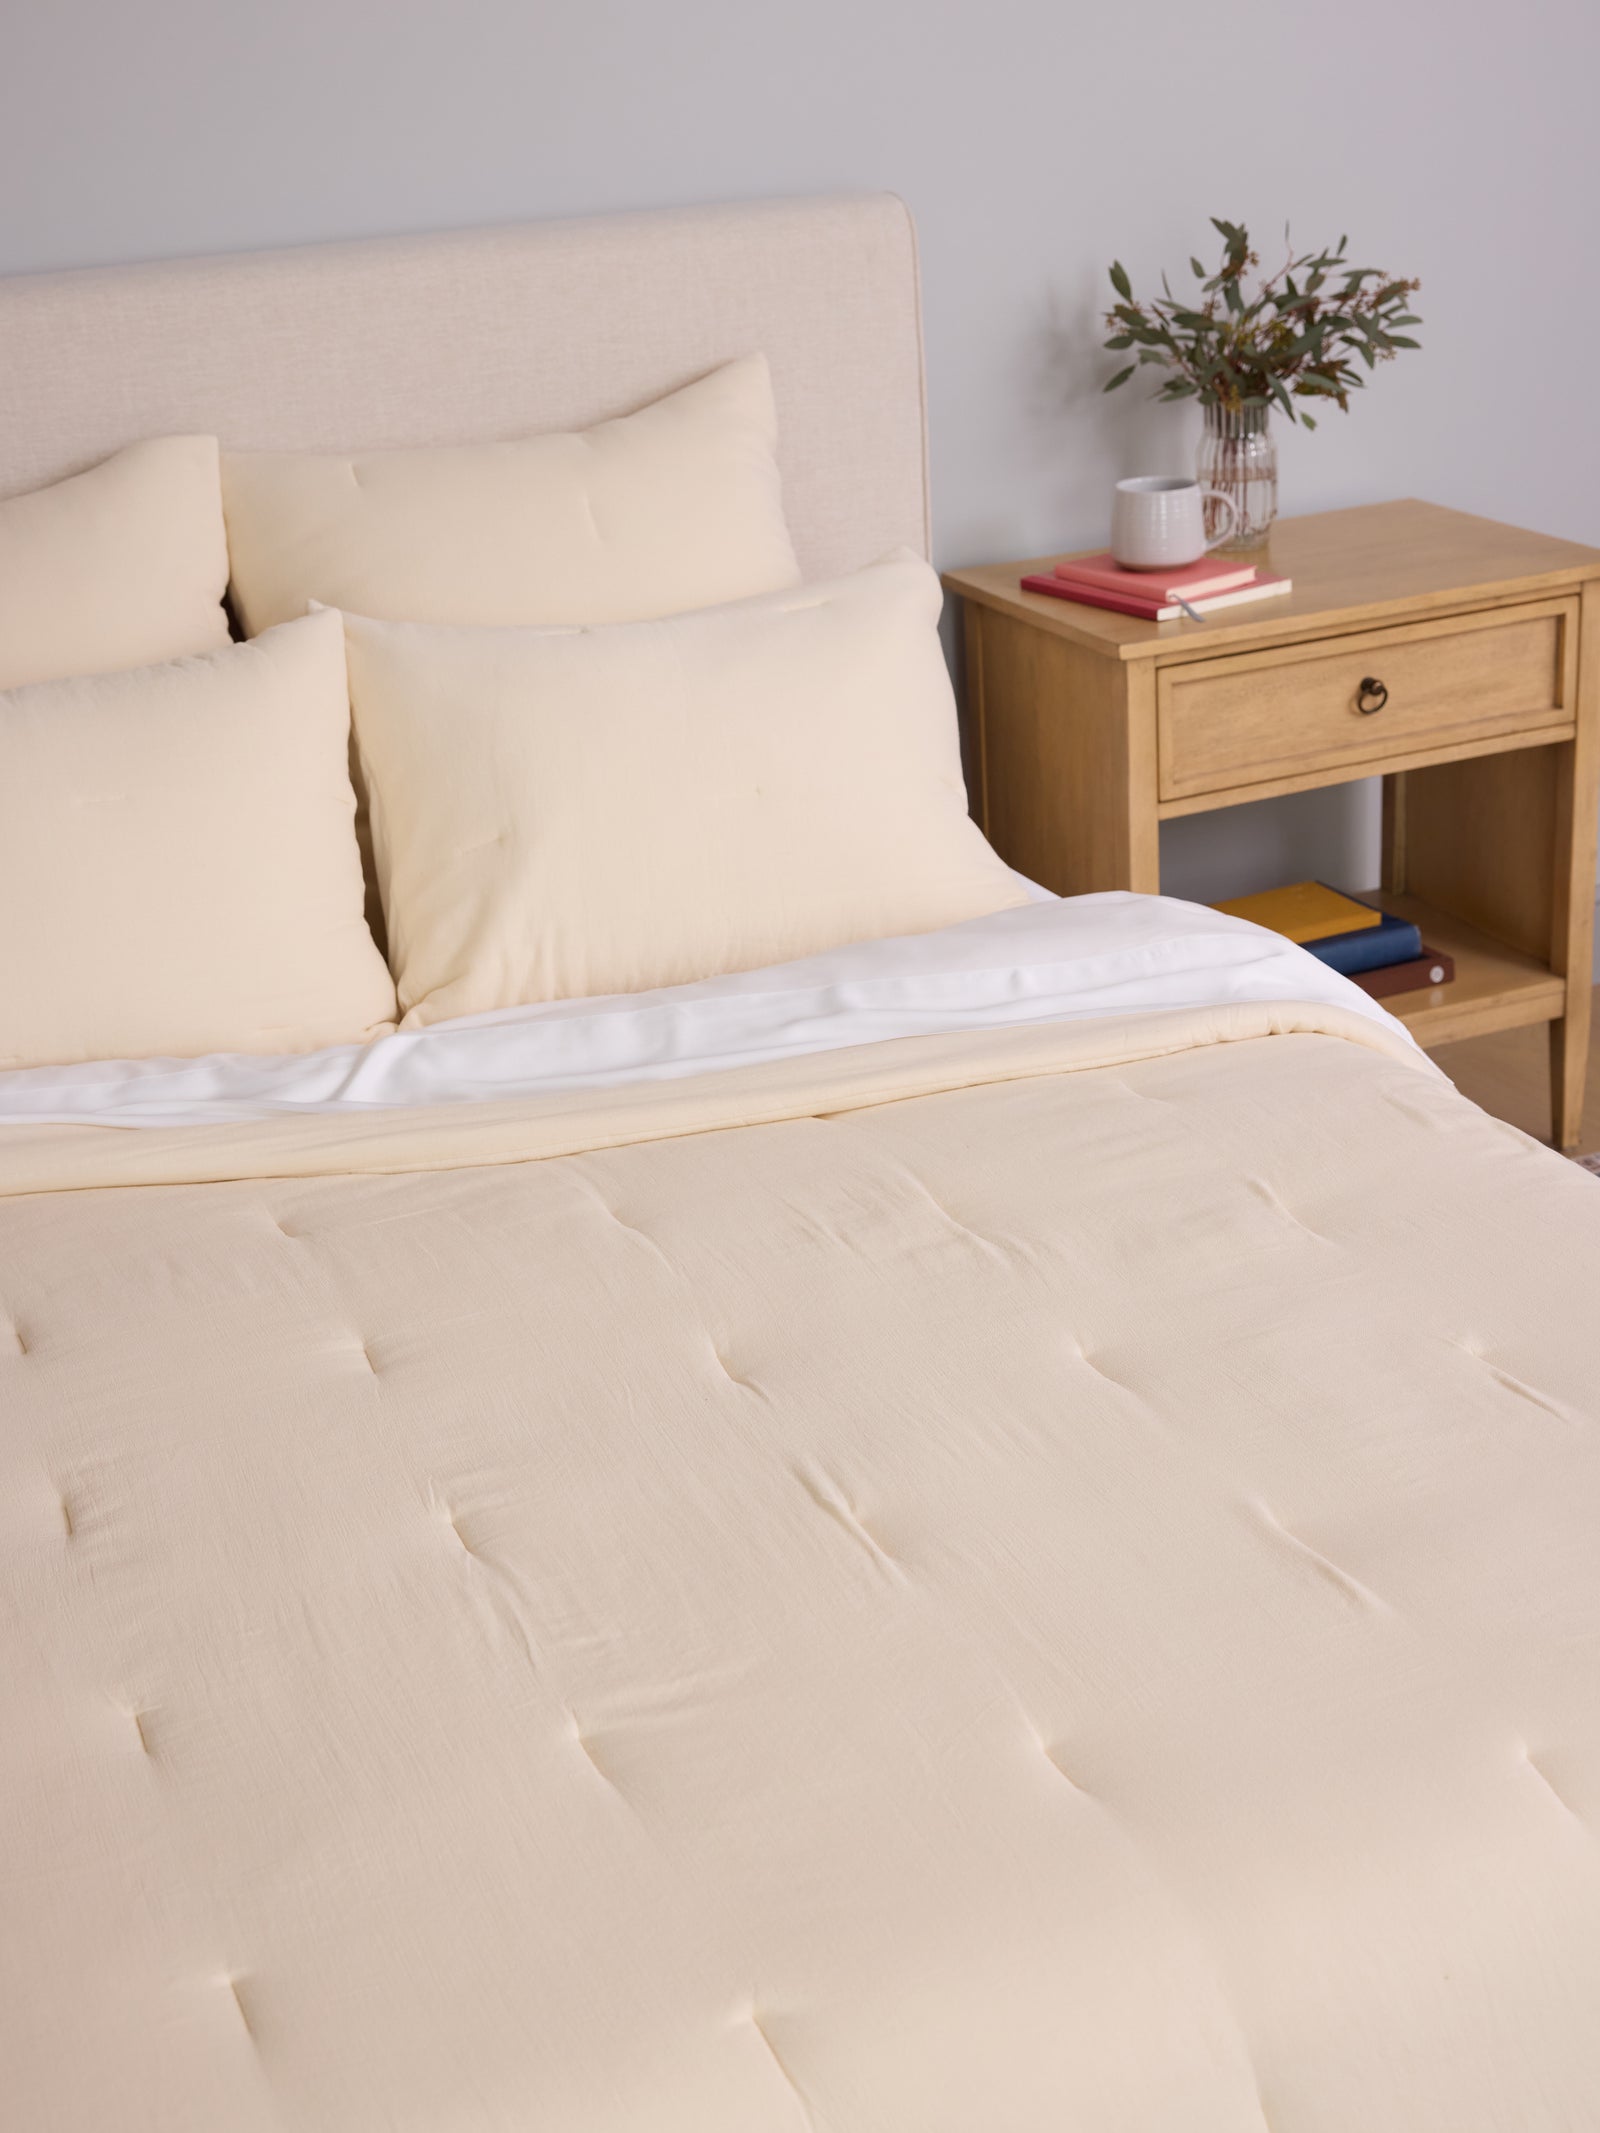 Buttermilk Aire Bamboo Puckered Shams. The shams are resting on a bed in a bedroom